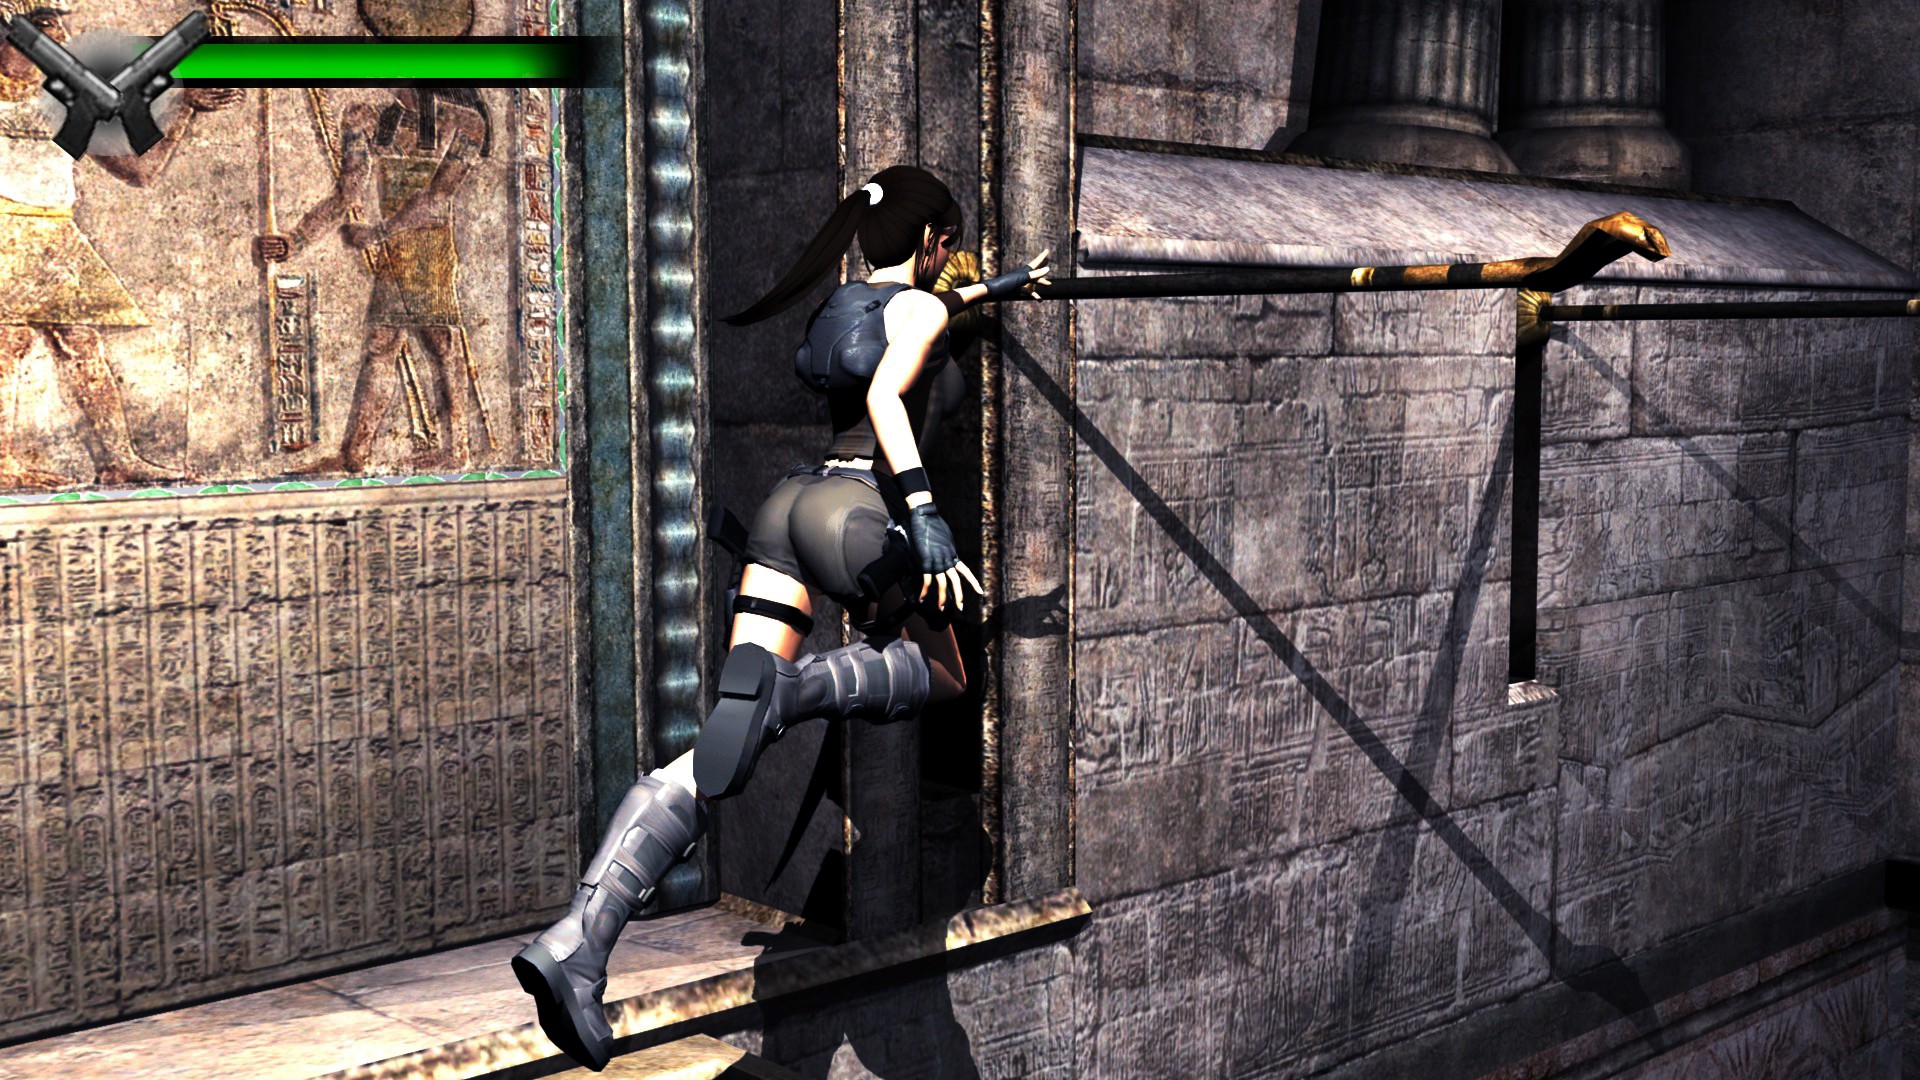 Tomb raider 2013 free download for pc